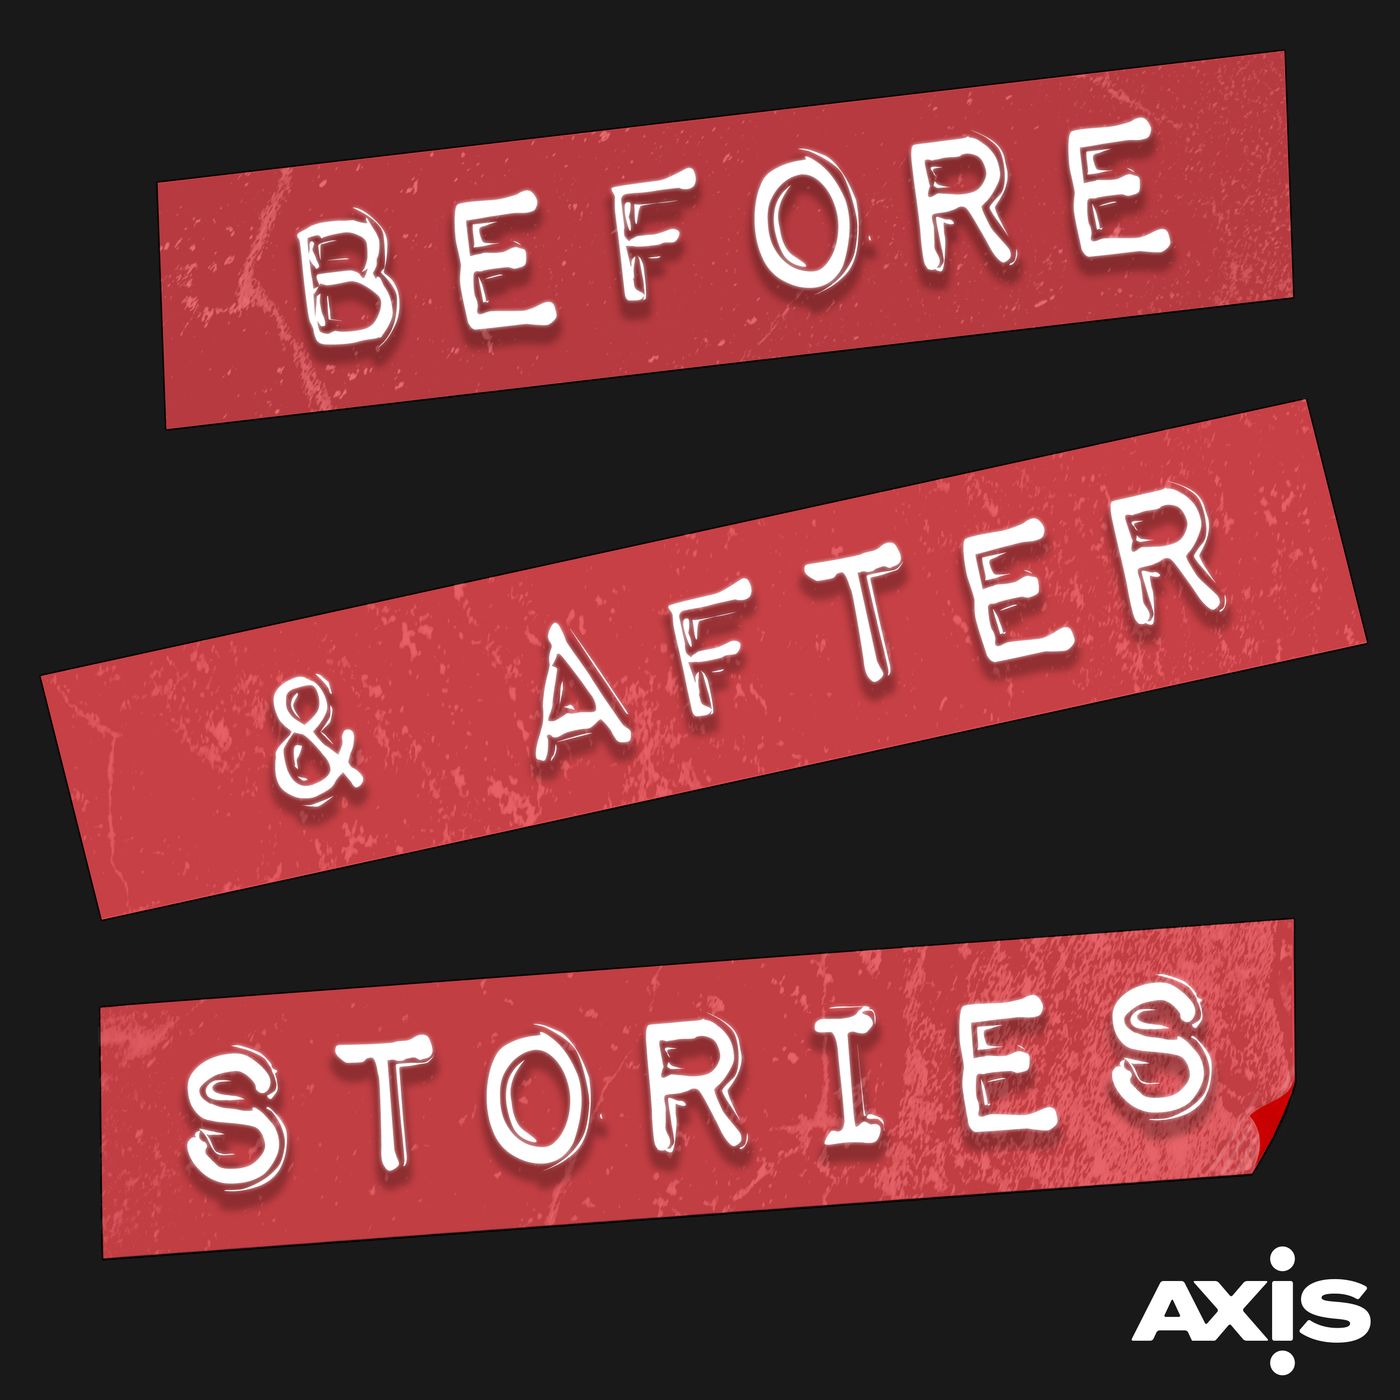 Before and After Stories